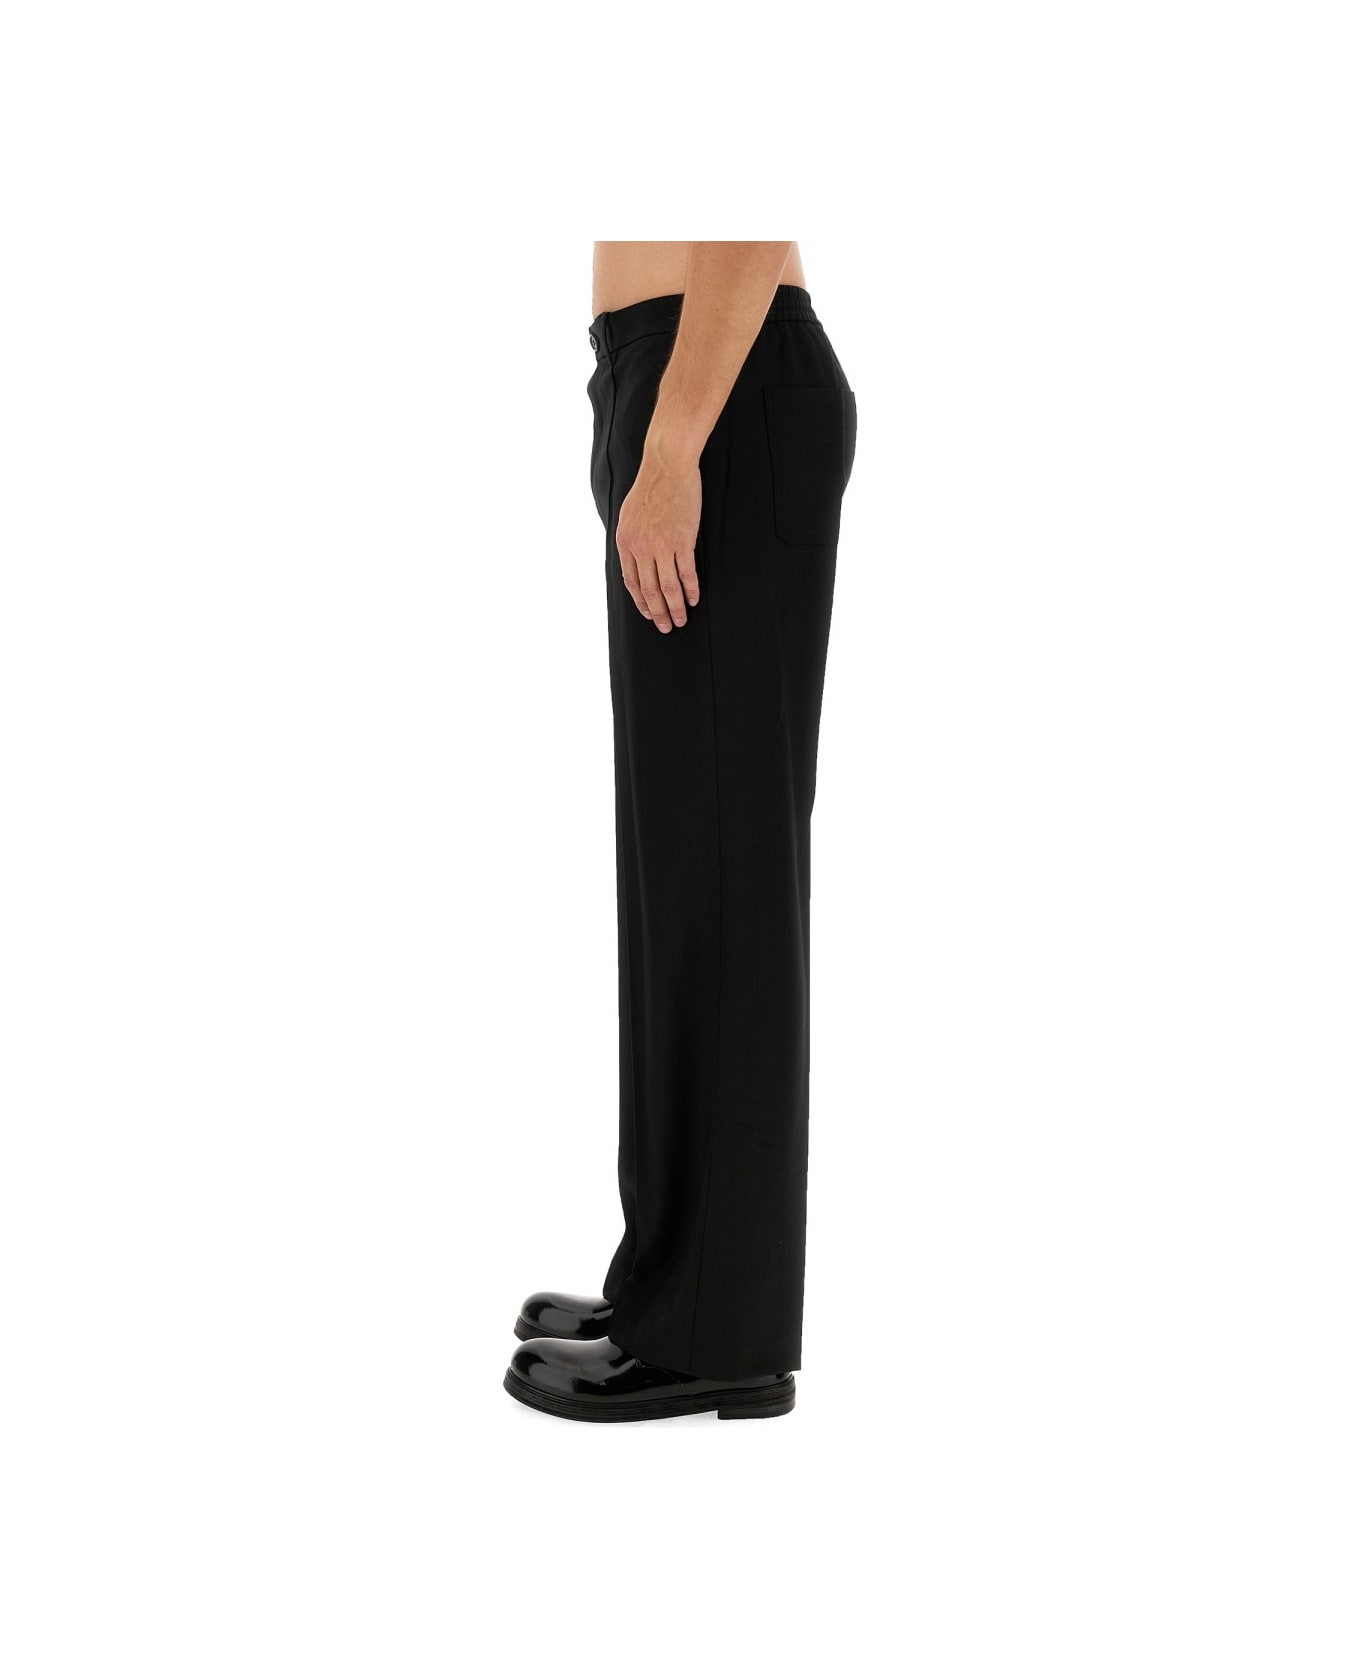 Helmut Lang Relaxed Fit Pants - BLACK